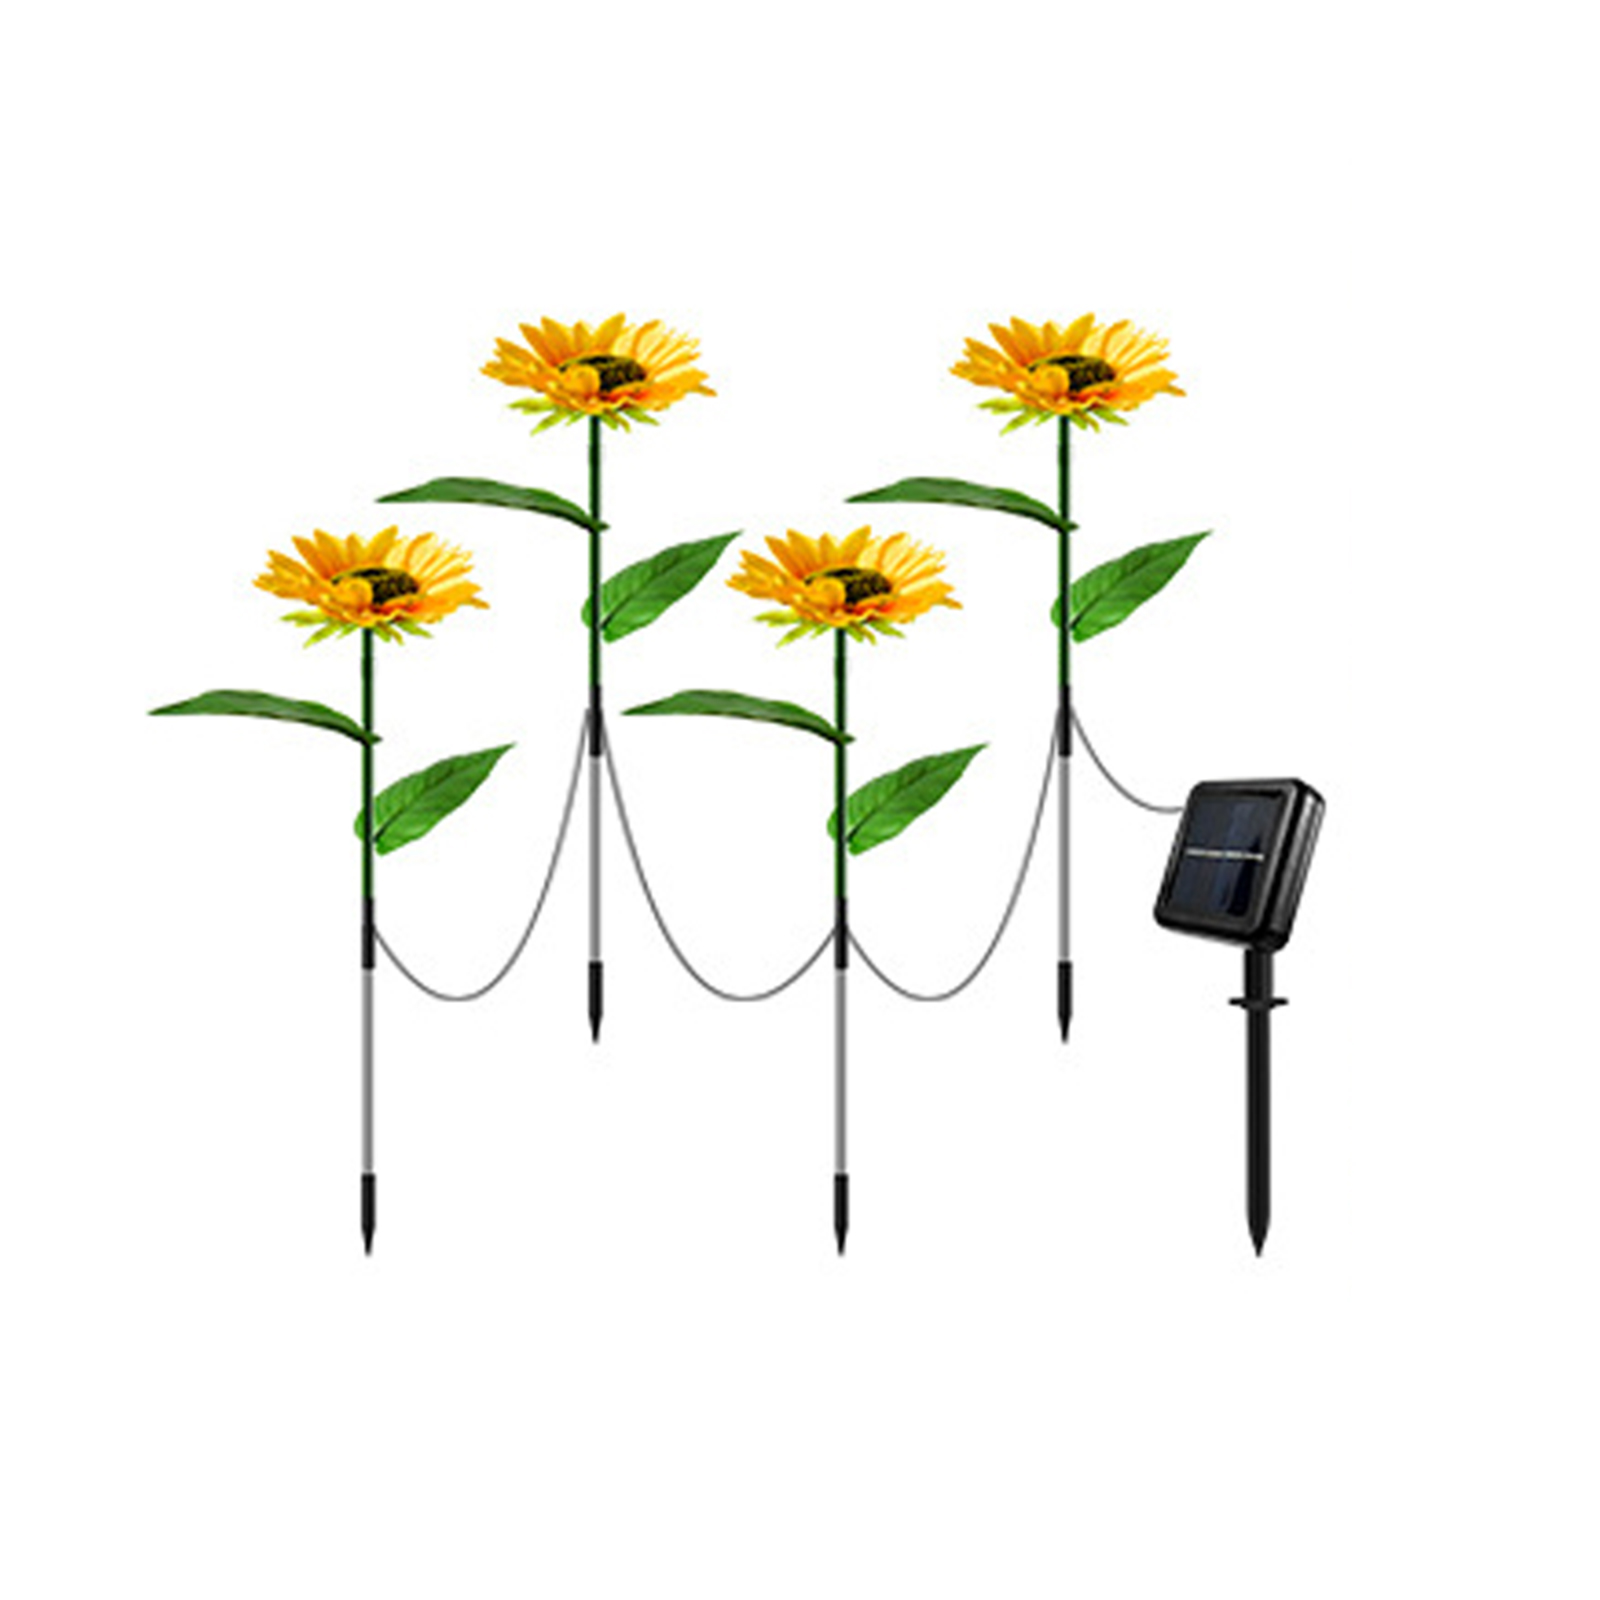 1pc/2pcs LED Solar Sunflowers Lights IP65 Waterproof Automatic On/off Garden Lights For Yard Patio Garden Pathway Porch Decor